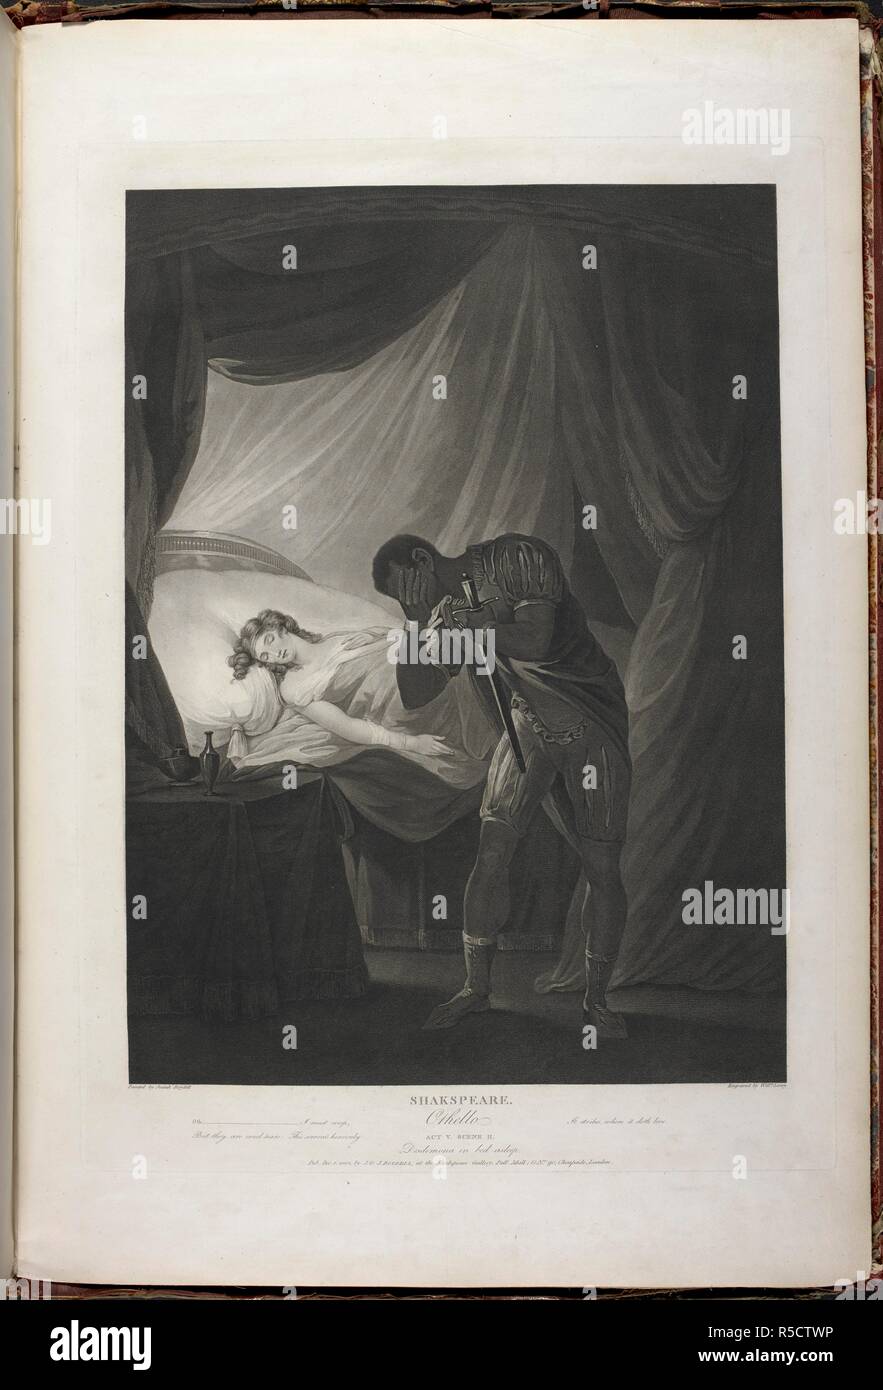 Othello act V scene II- Desdemona in bed asleep. A Collection of Prints, from pictures painted for the purpose of illustrating the Dramatic Works of Shakspeare, by the Artists of Great Britain. London : J. & J. Boydell, 1803. Source: Tab.599.c vol. II plate L. Language: English. Author: SHAKESPEARE, WILLIAM. BOYDELL, JOHN. Stock Photo